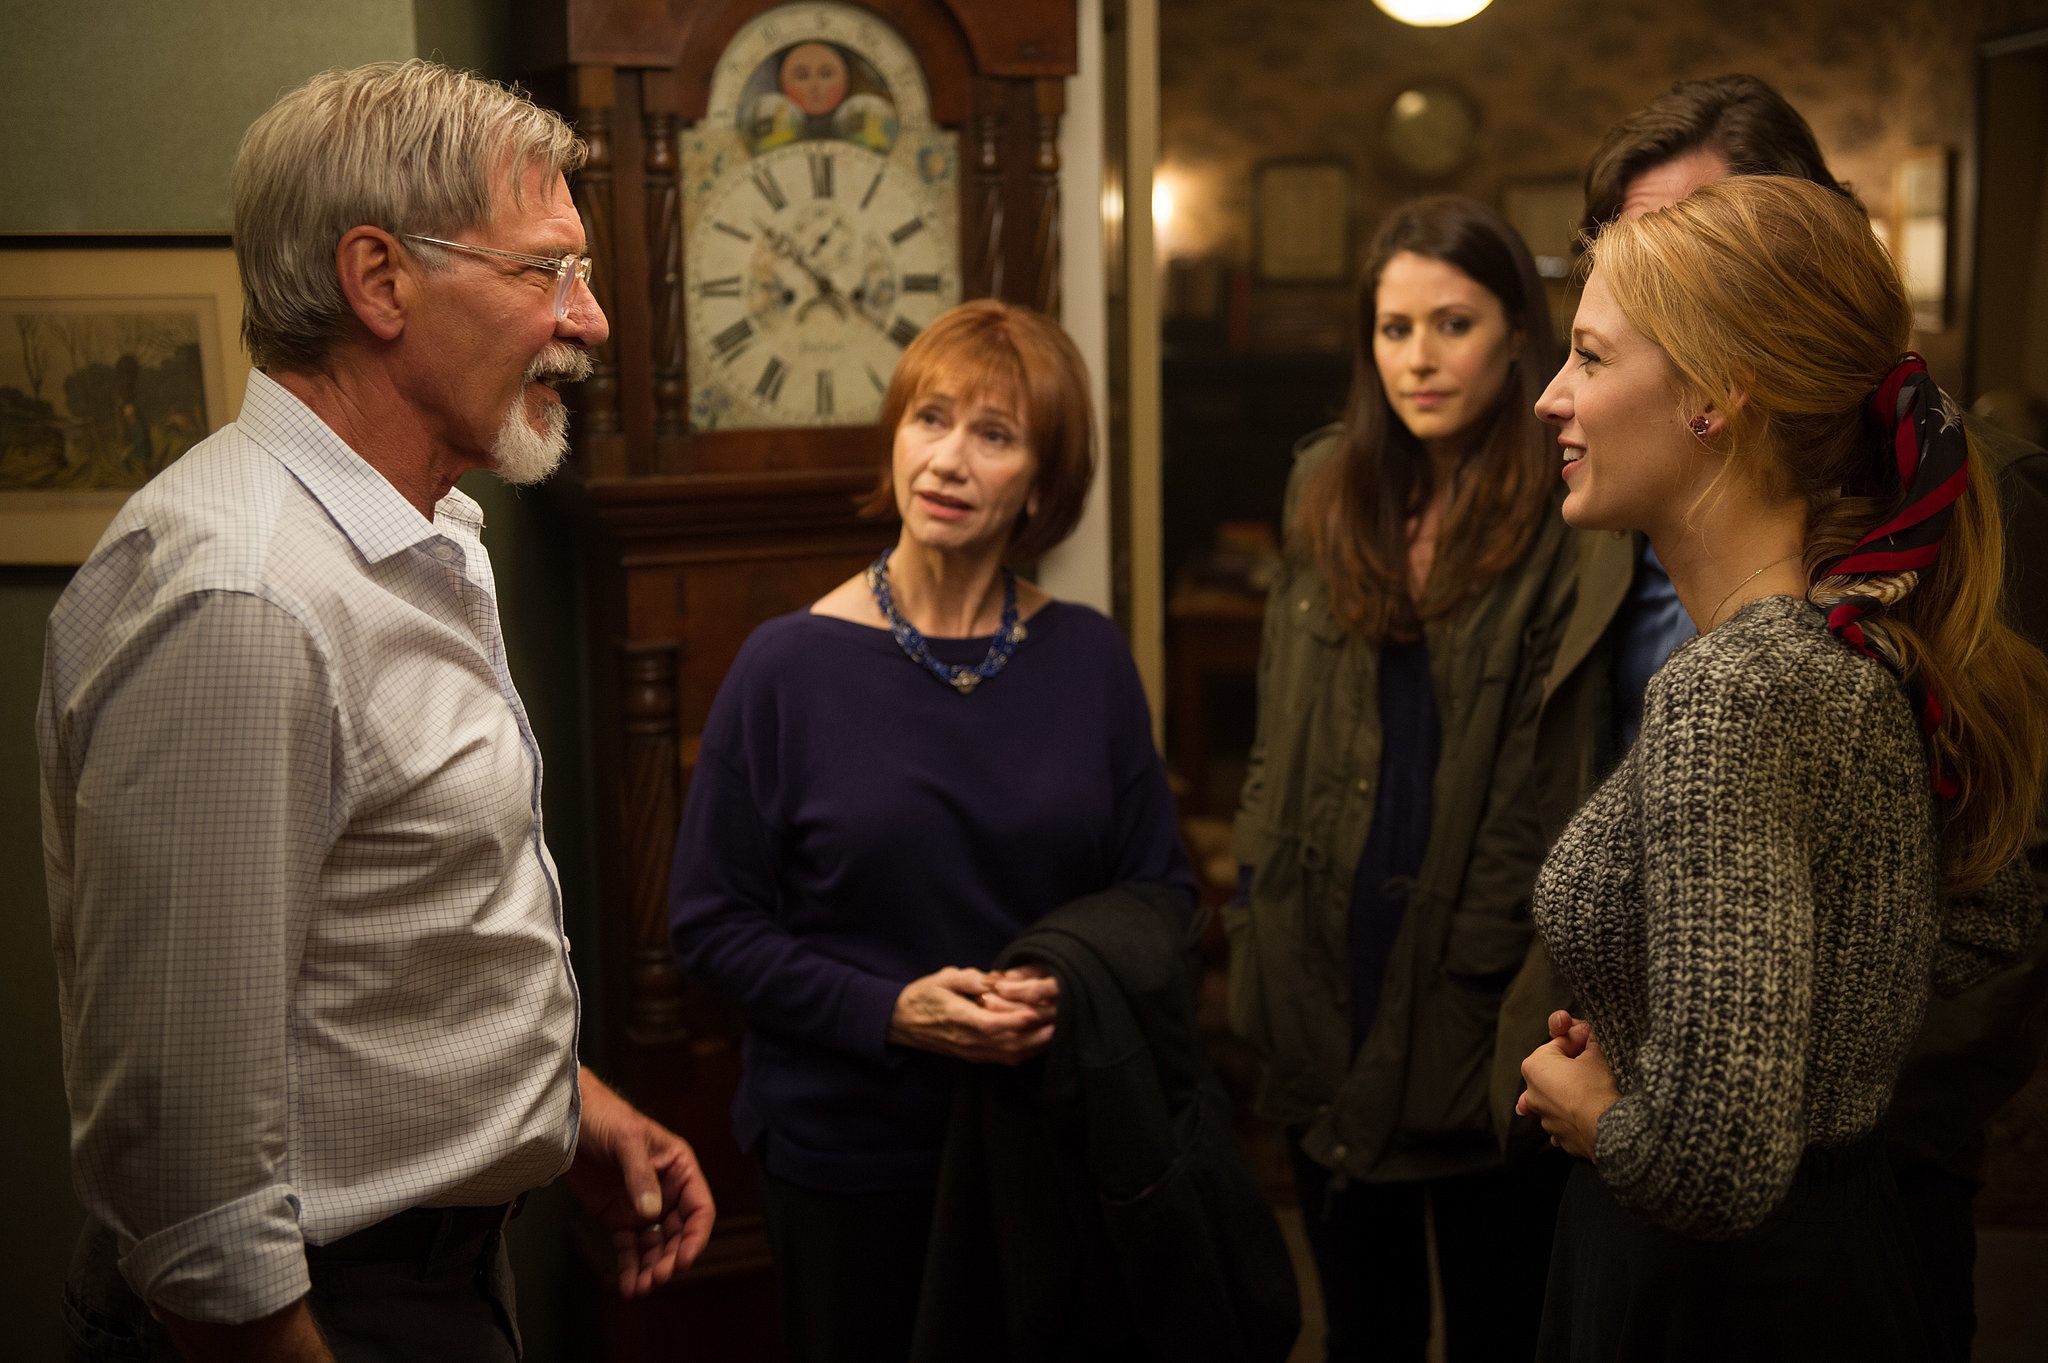 Blake Lively and Harrison Ford in &#039;The Age of Adaline&#039;